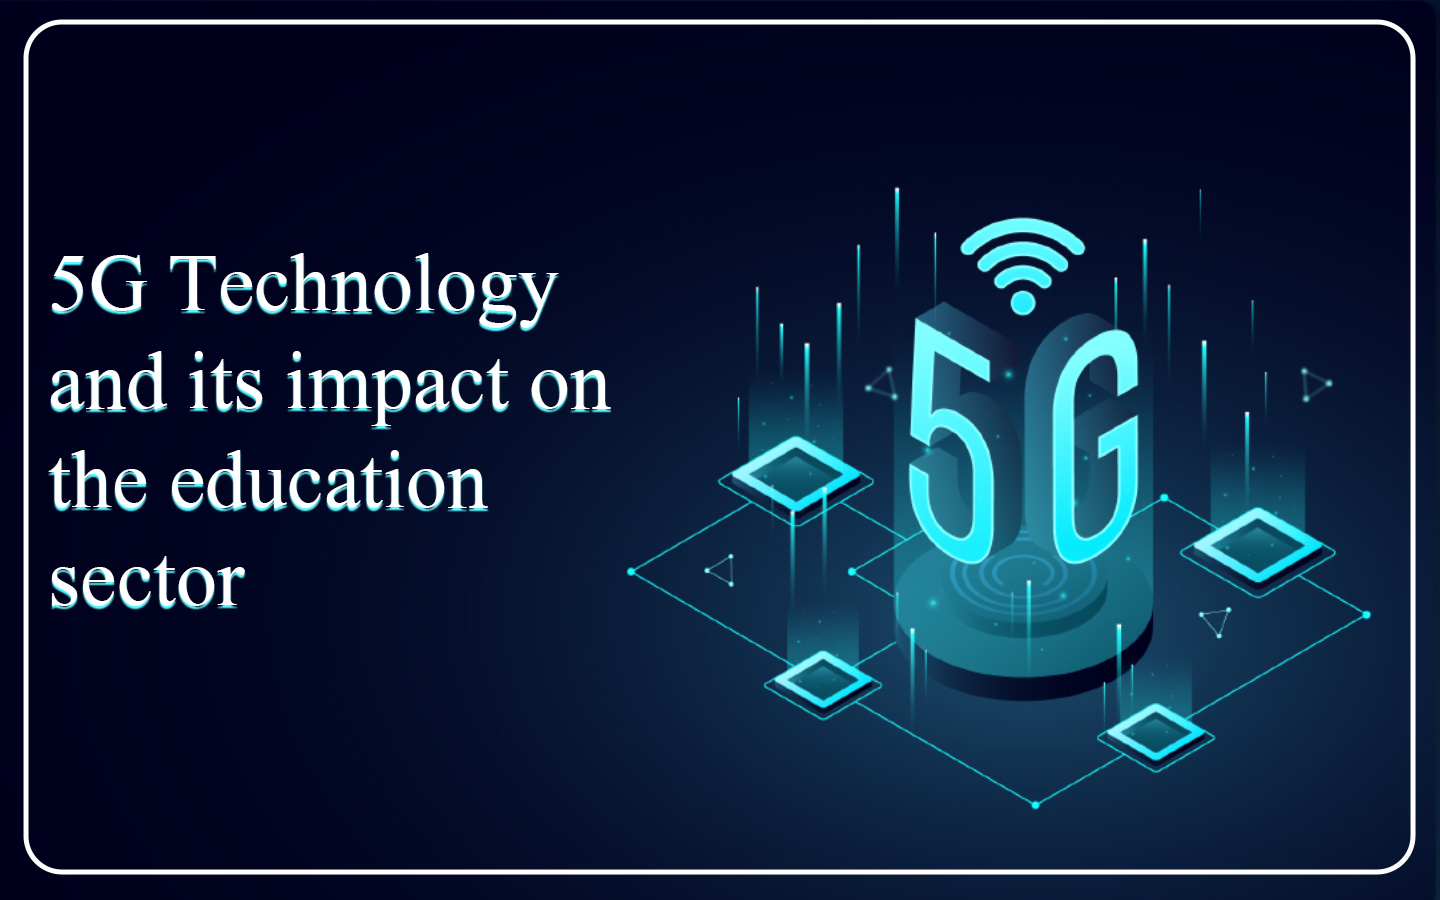 5G Technology and its impact on the education sector